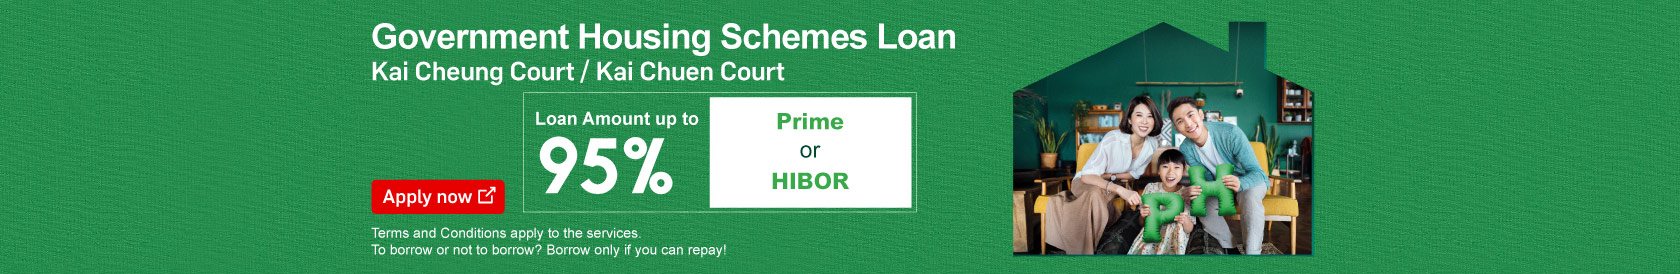 Apply now, Government Housing Schemes Loan with loan amount up to 95% and tenor up to 25 years (Opens in a new window)